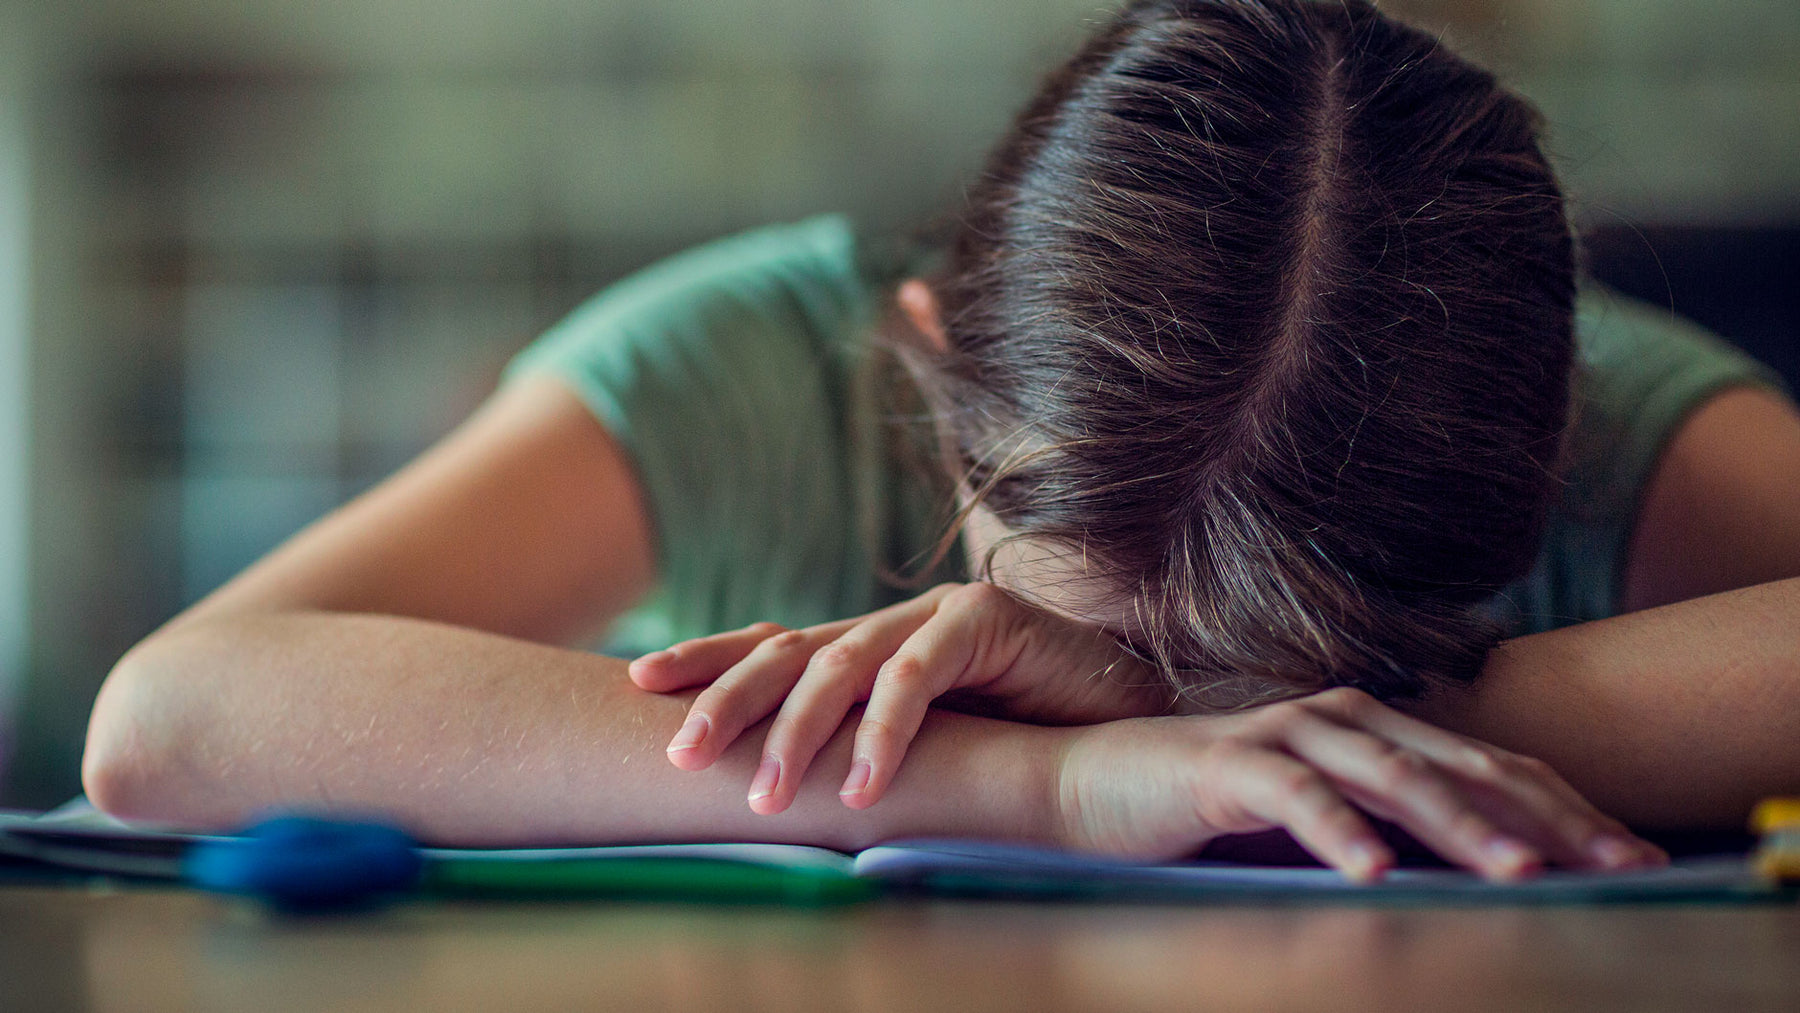 common signs of test or exam anxiety in children